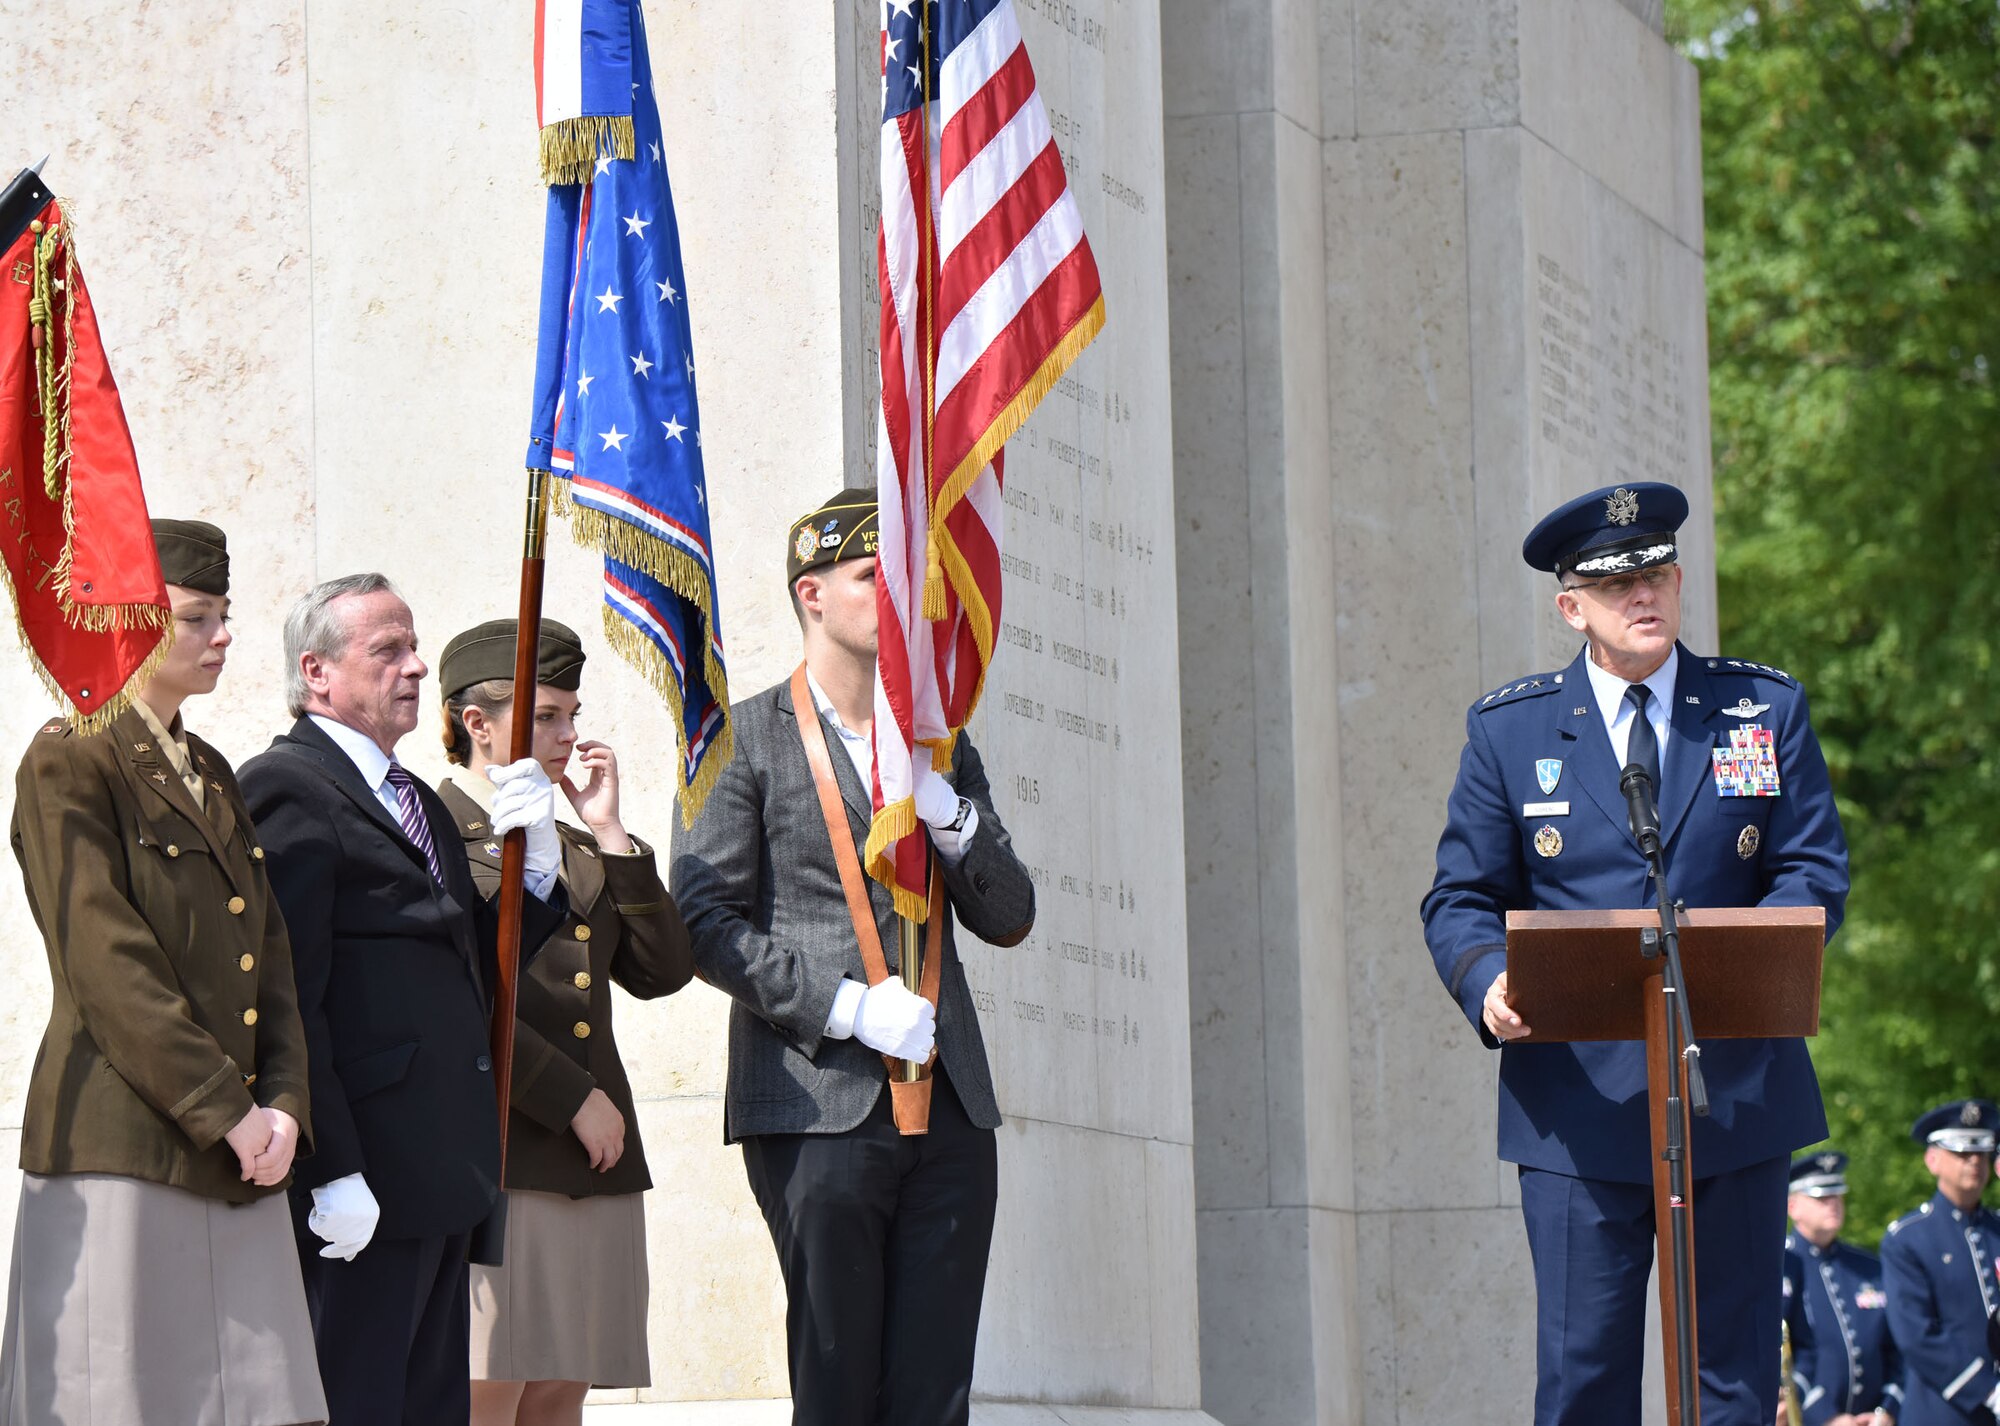 PARIS – U.S. Air Force Gen. Frank Gorenc, U.S. Air Forces in Europe-Air Forces Africa commander, deliveres a speech during a Memorial Day ceremony at the Lafayette Escadrille Memorial, in Marnes-la-Coquette, France, May 28, 2016. During the ceremony, French and American speakers honored the shared sacrifices of U.S. and French service members fighting for each other’s freedom and security in a relationship that began more than 240 years ago during the American Revolutionary War. (U.S. Air Force photo by Senior Master Sgt. Brian Bahret/Released) 